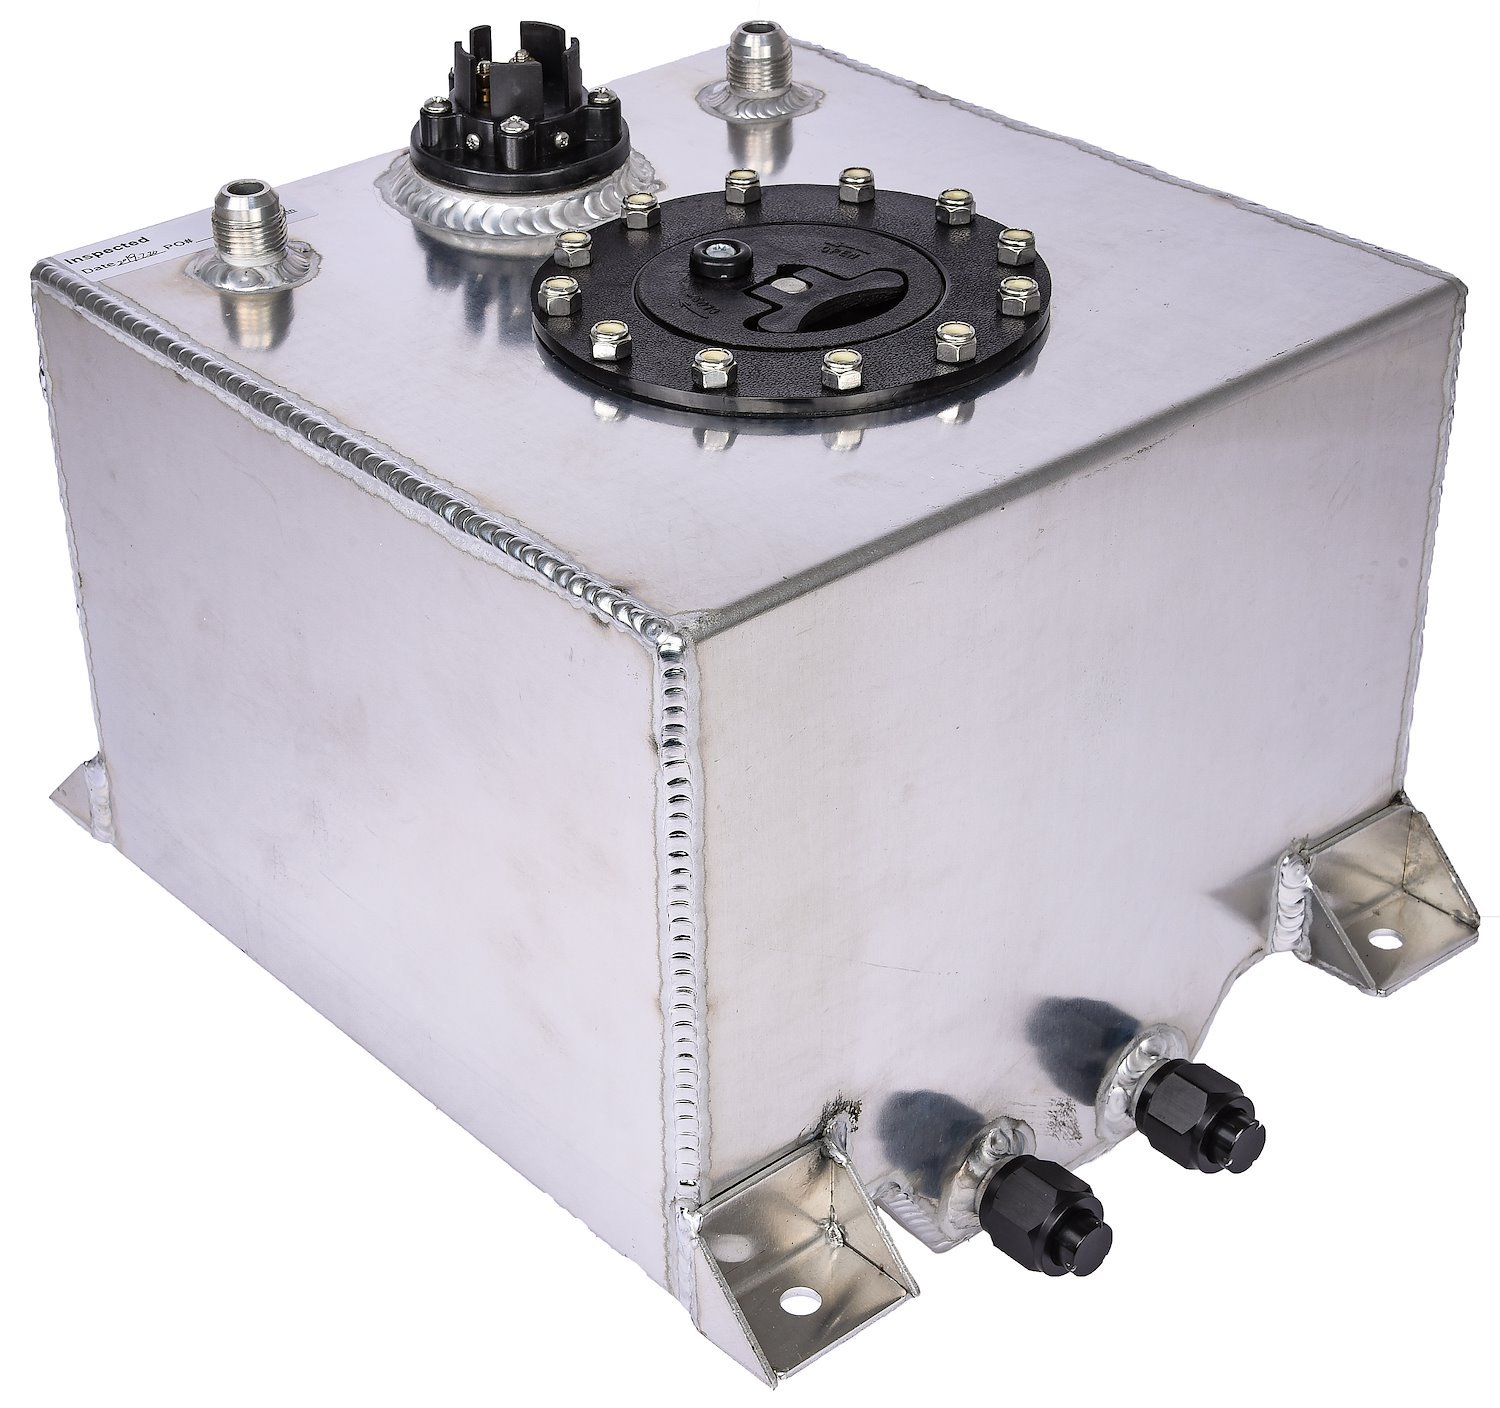 5-Gallon Fuel Cell [Polished Aluminum]